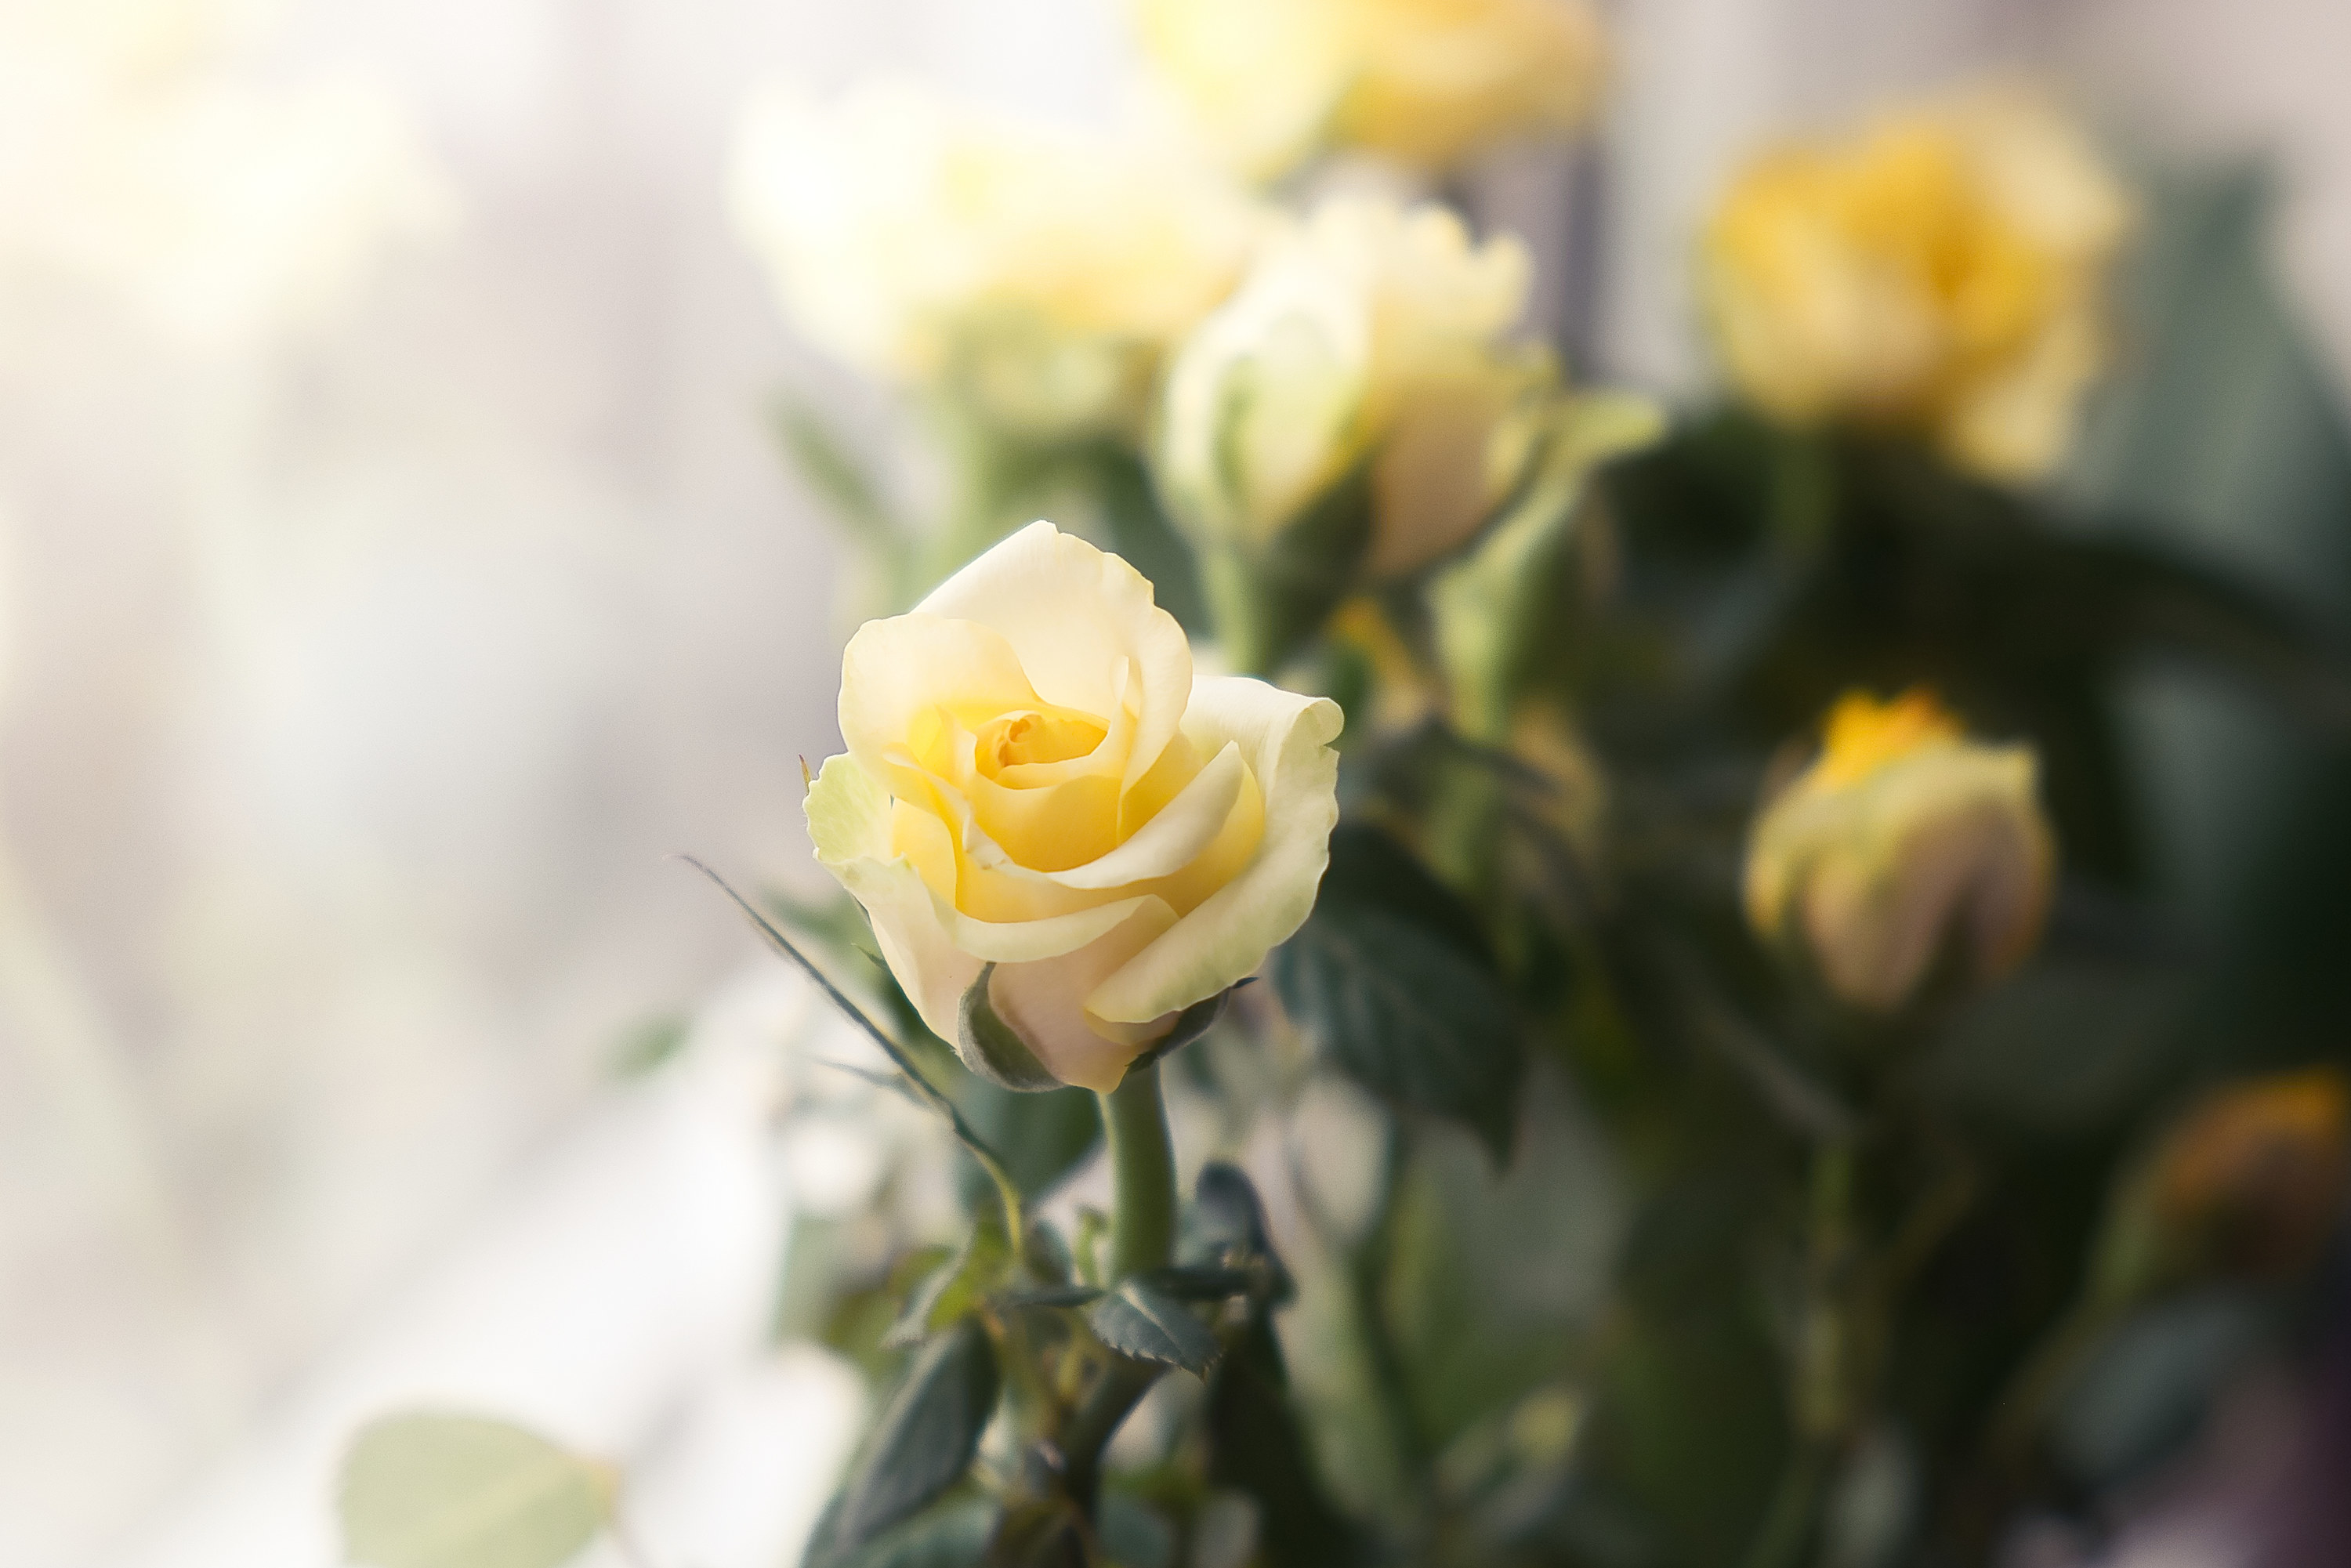 The bouquet of yellow roses on the window. Natural flowers background.